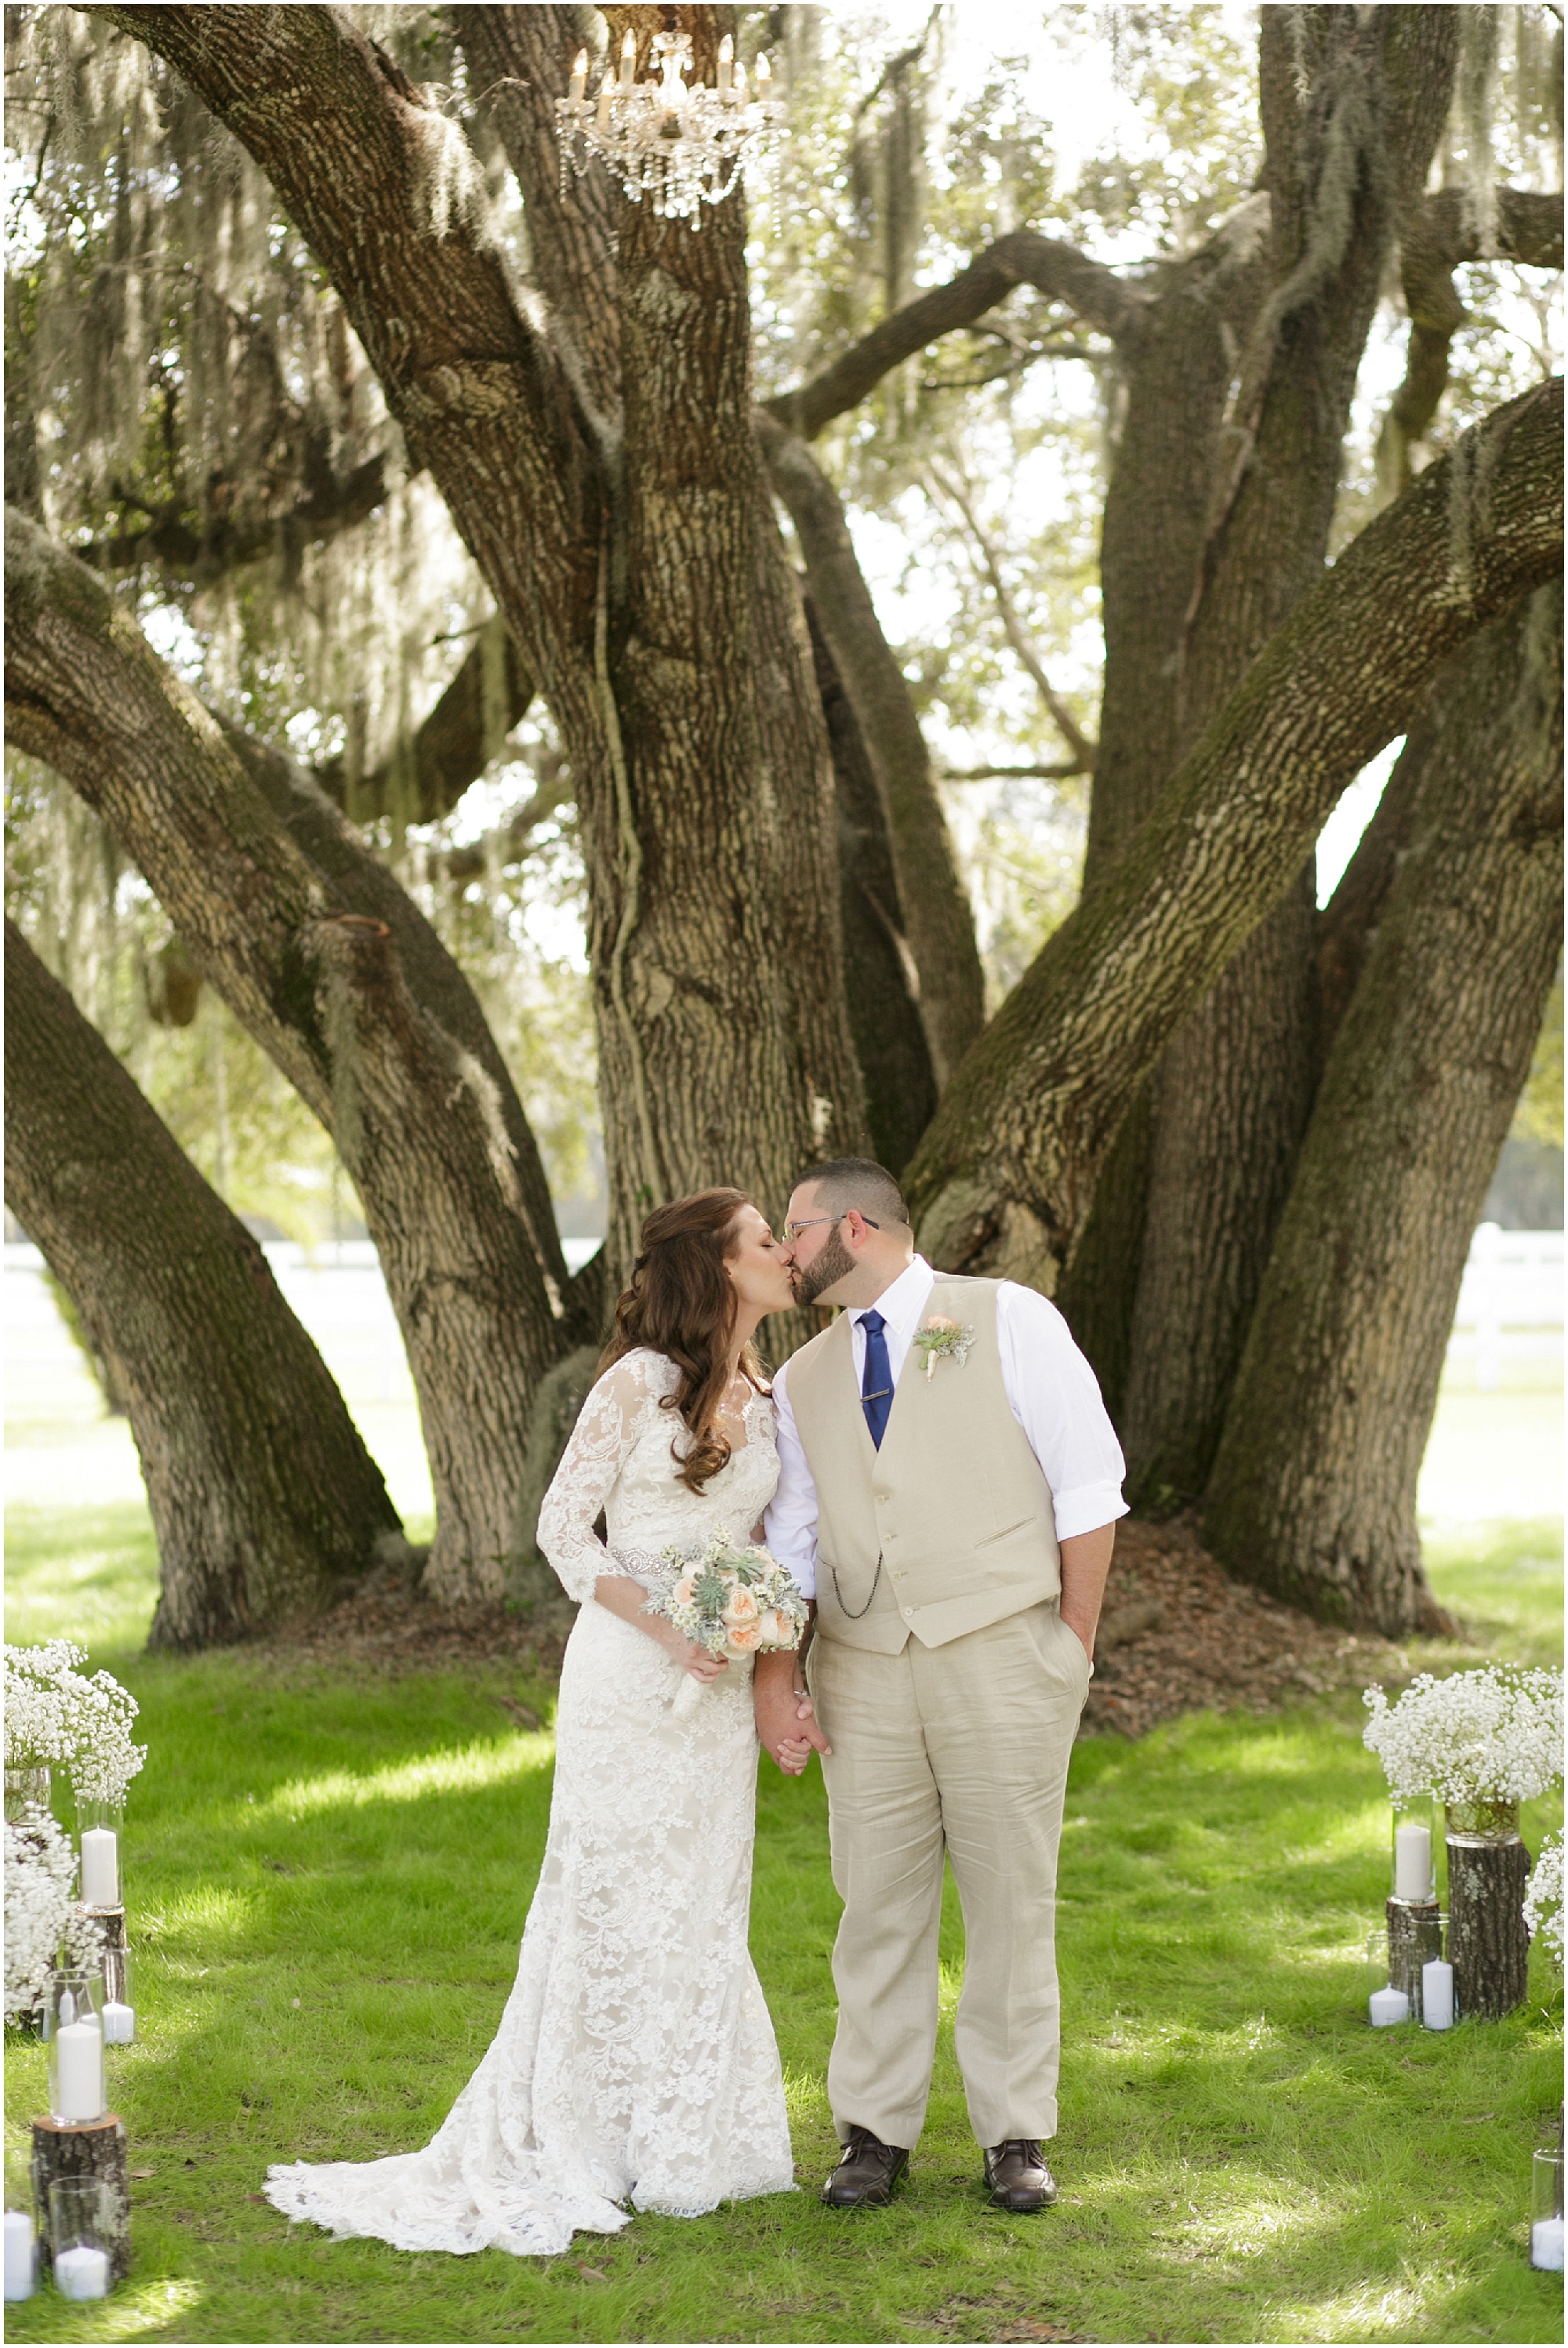 Bride and groom sharing a kiss under a large oak tree at their wedding ceremony.